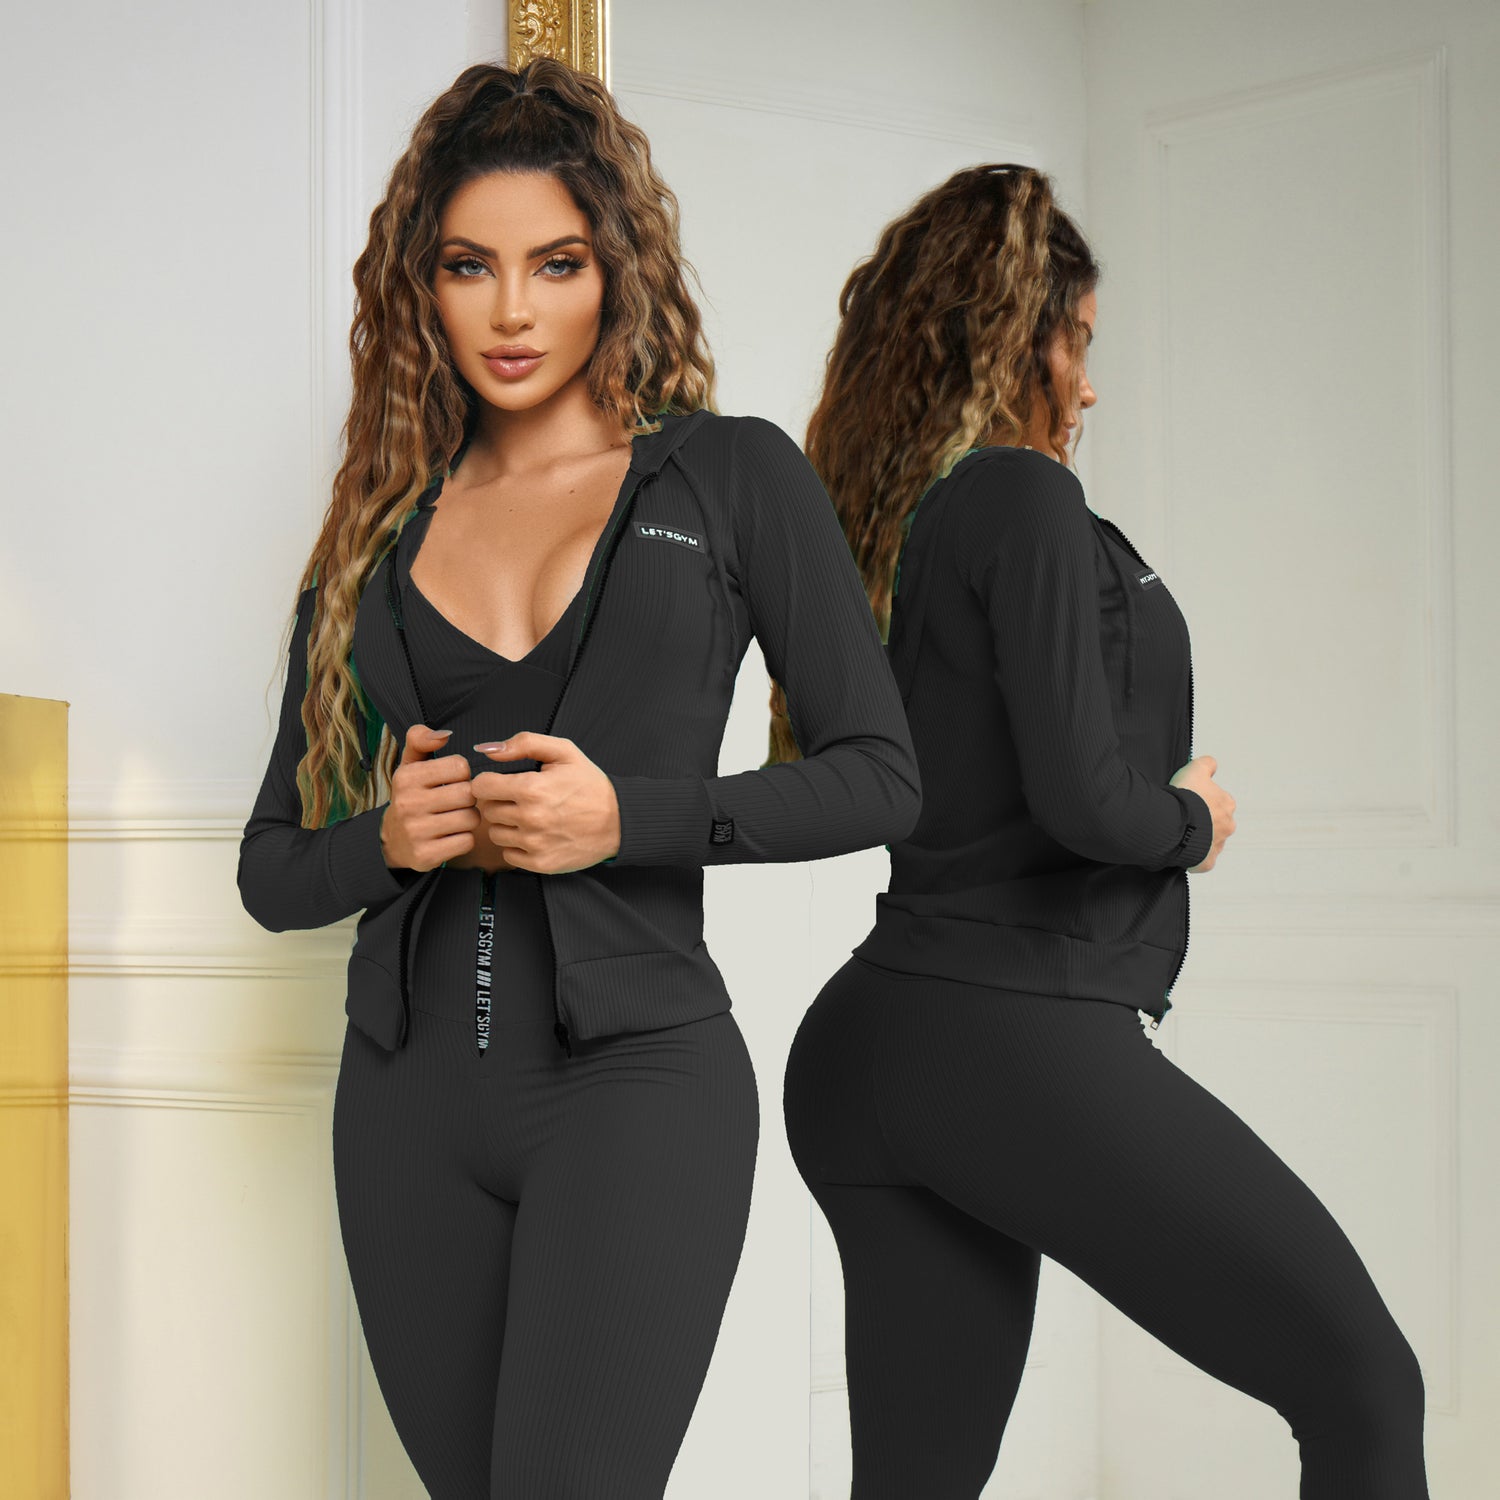 Immortal Fit Activewear - Brasil Hair Skin and Body